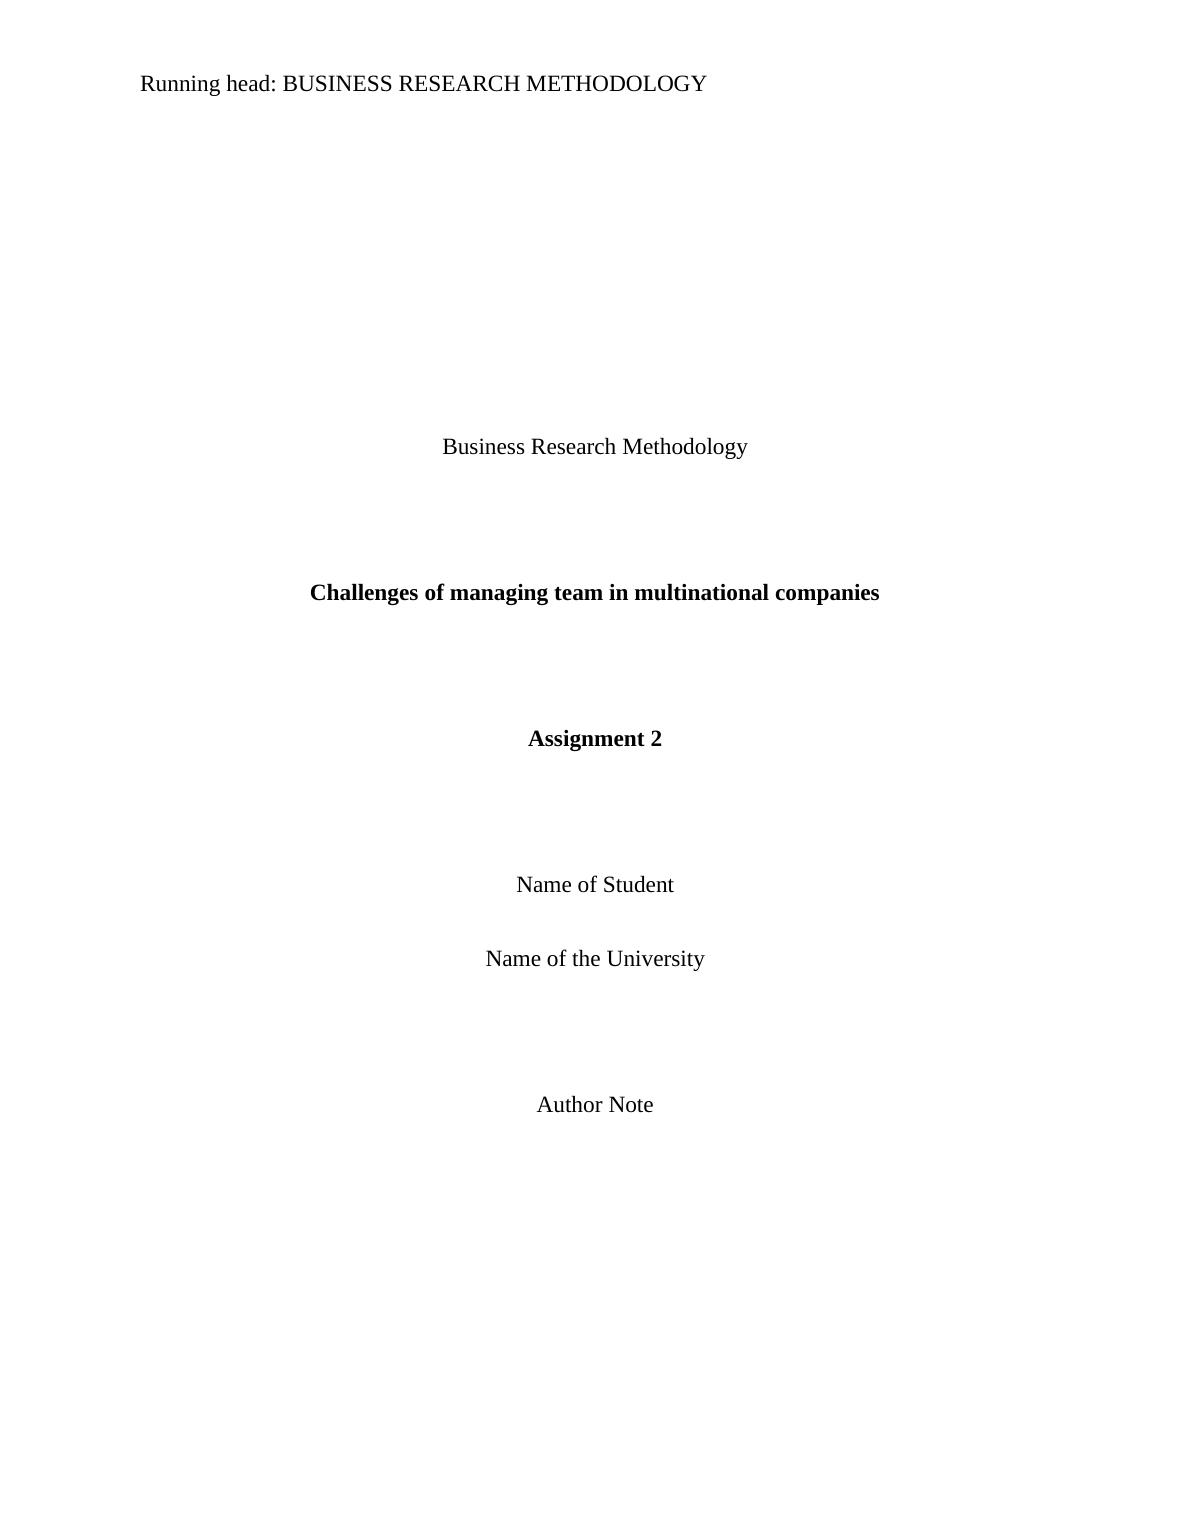 HI6008 - Business Research Methodology, Multinational Companies_1